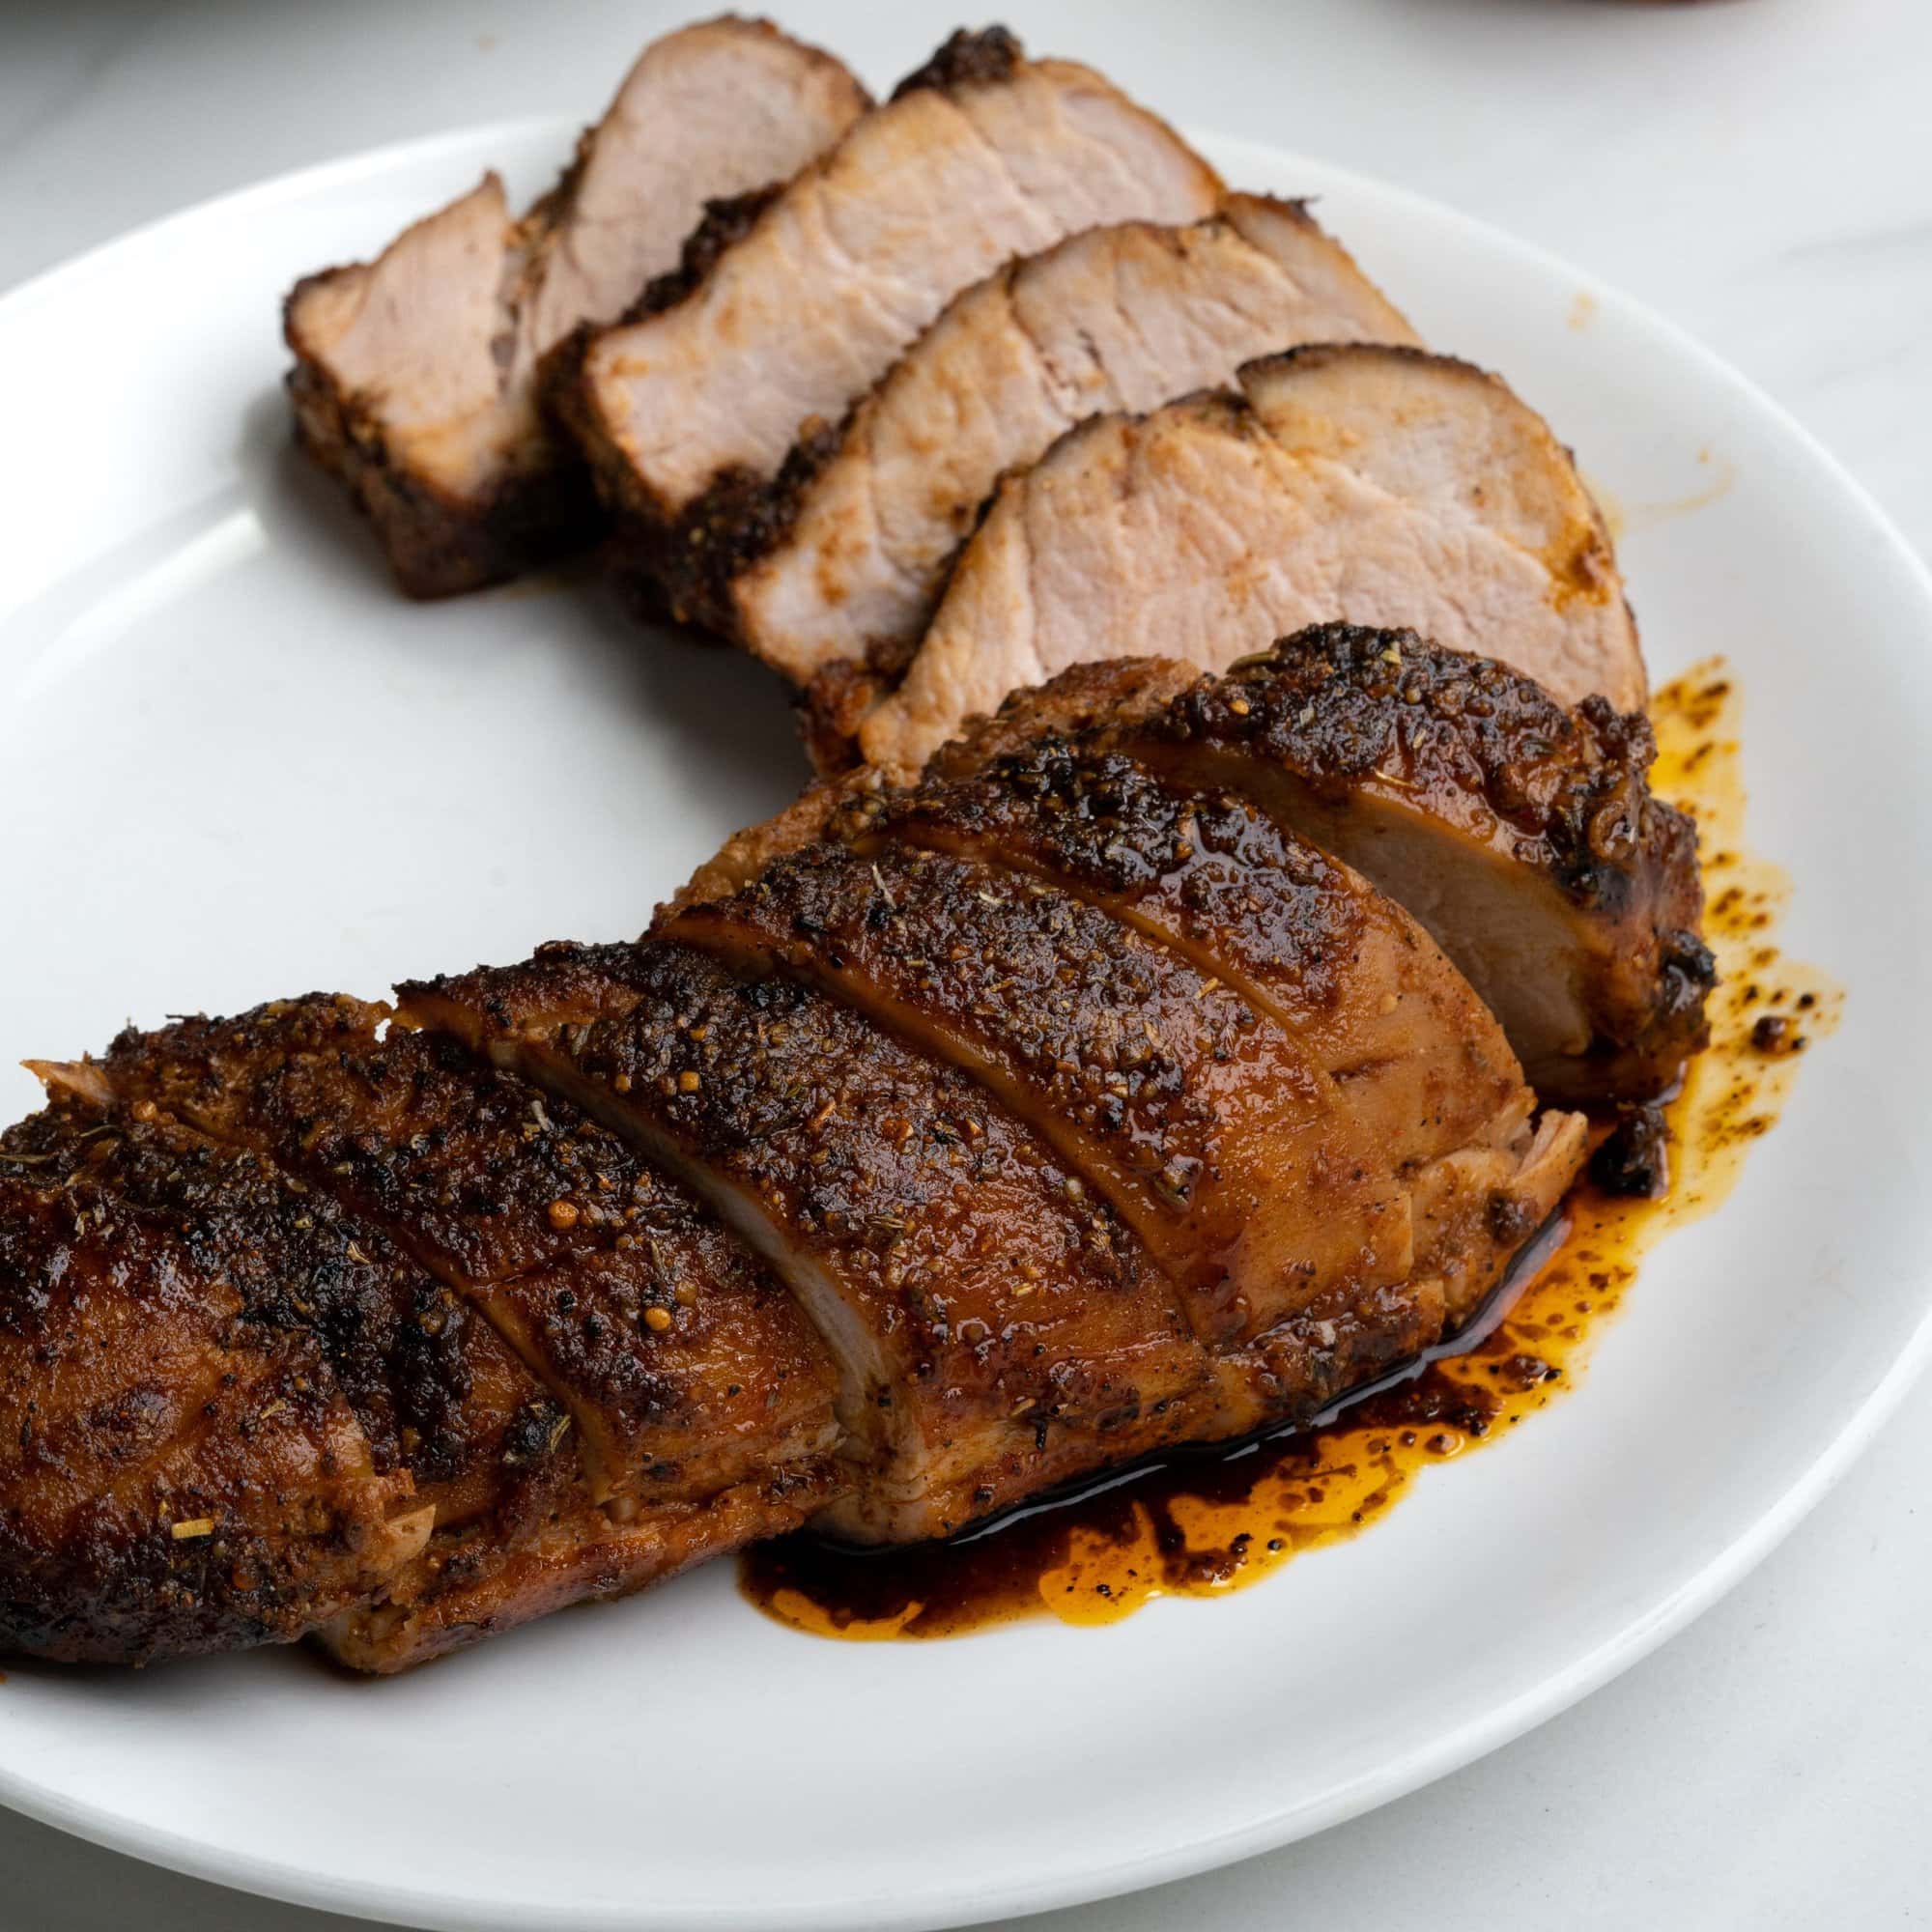 Pork tenderloin roasted in oven and the slices are arranged in a white plate. Few show a great crust and others the tender cooked meat.